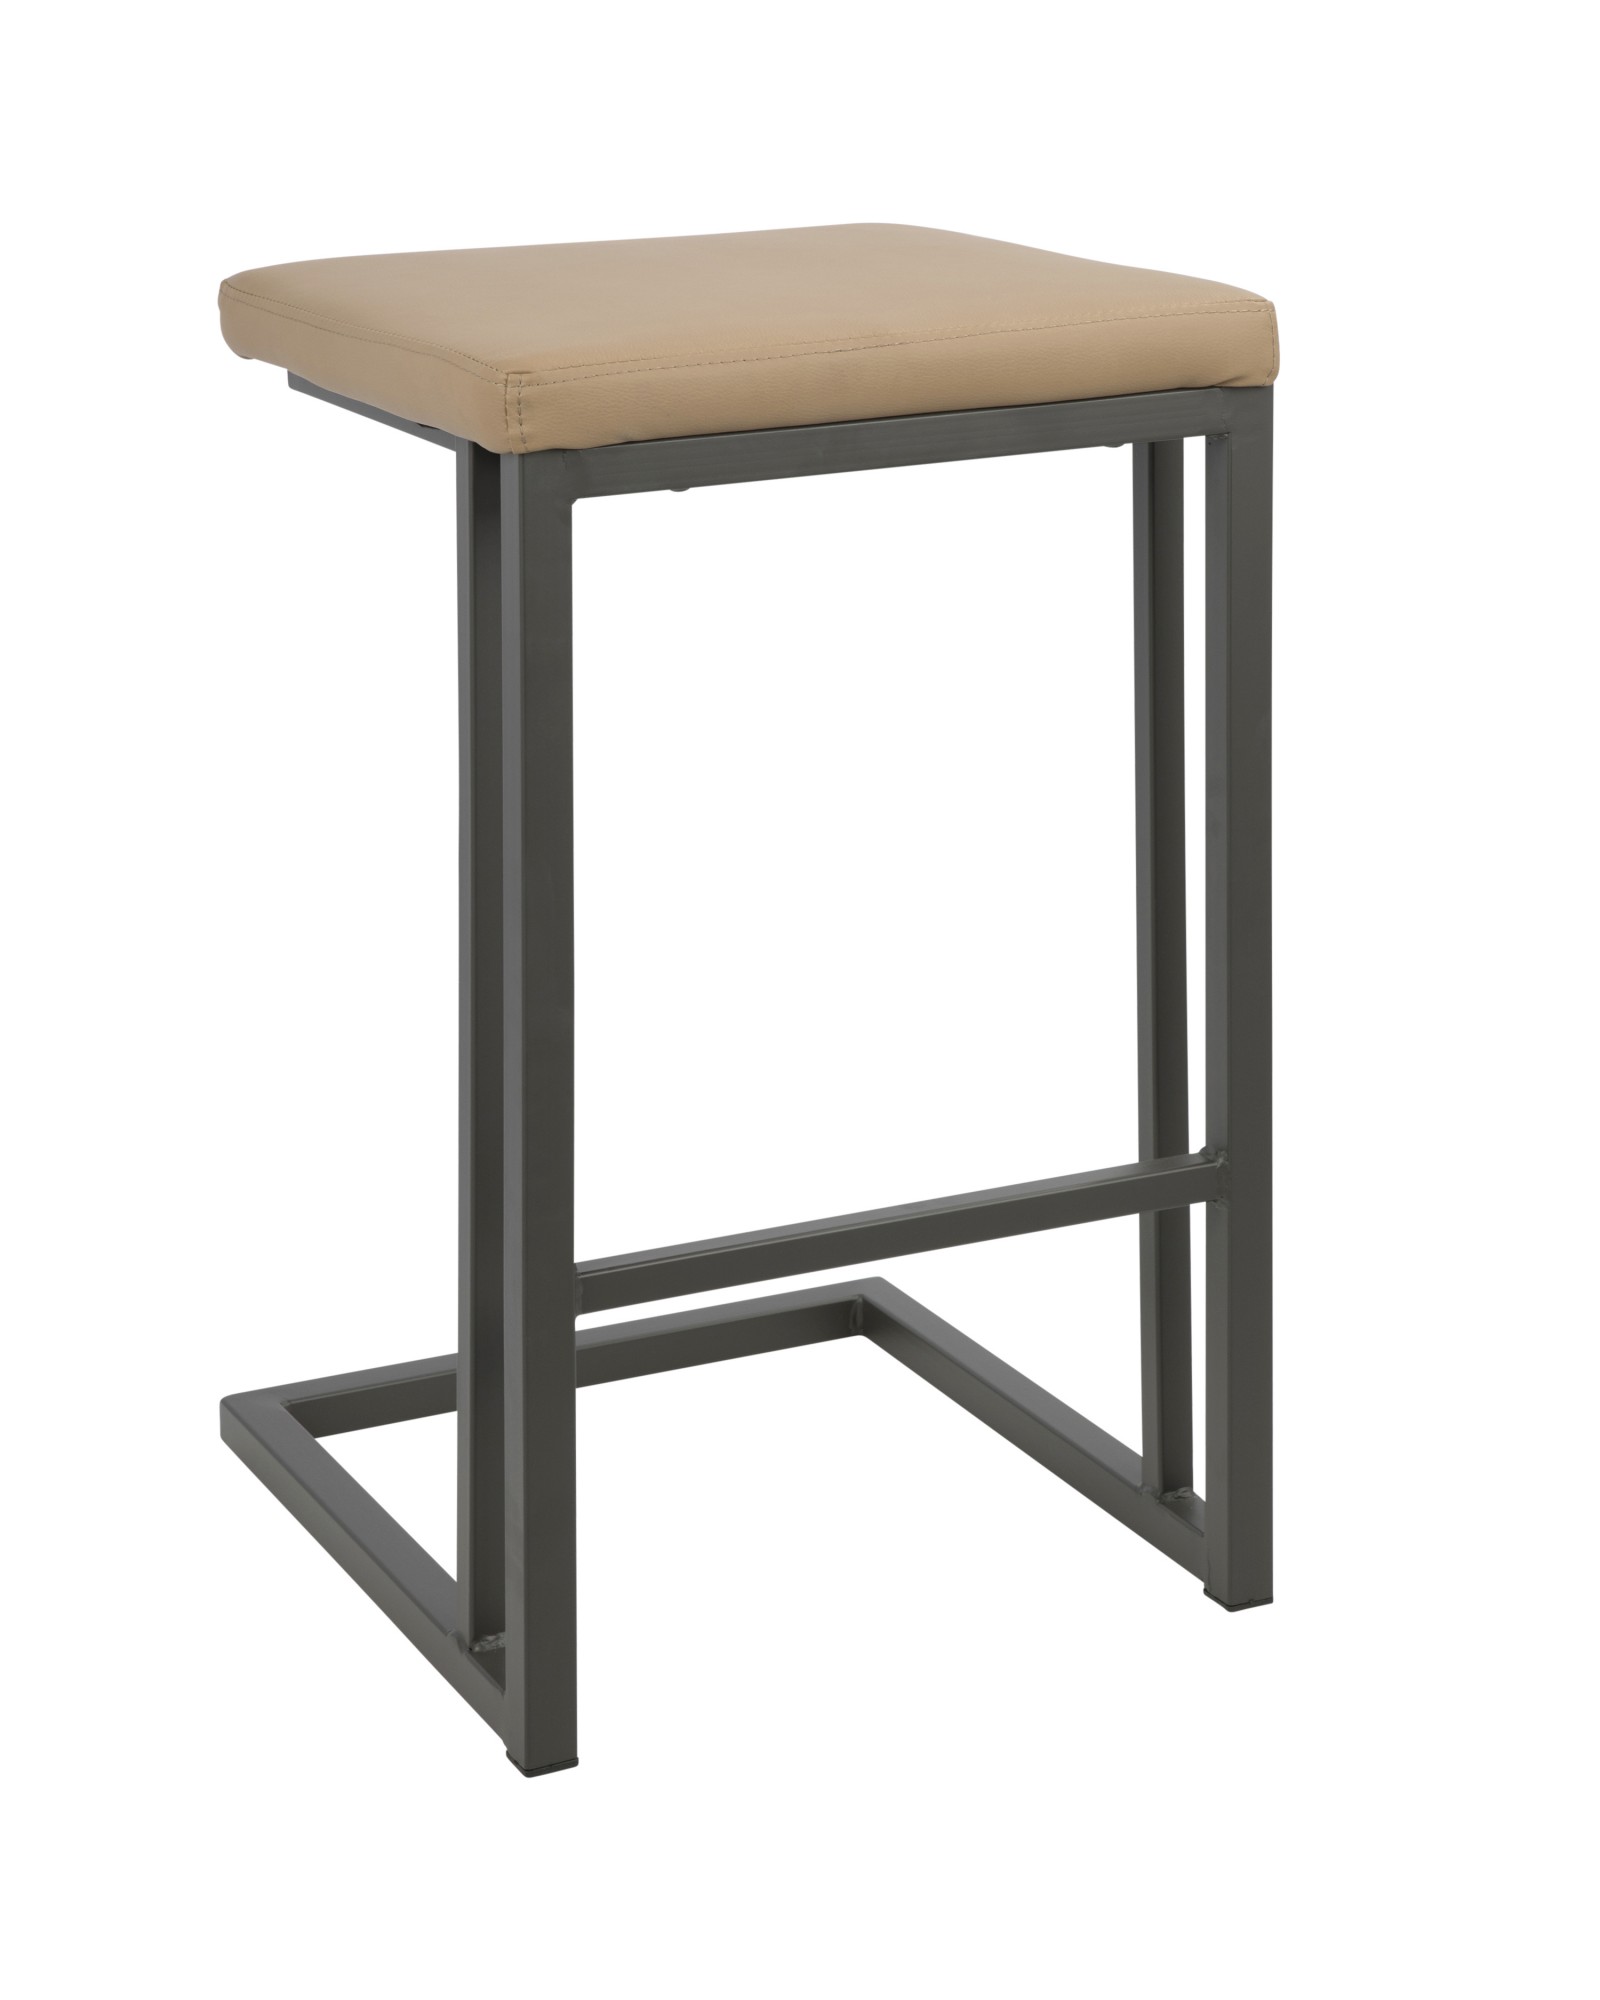 Roman Industrial Counter Stool in Grey and Camel Faux Leather - Set of 2